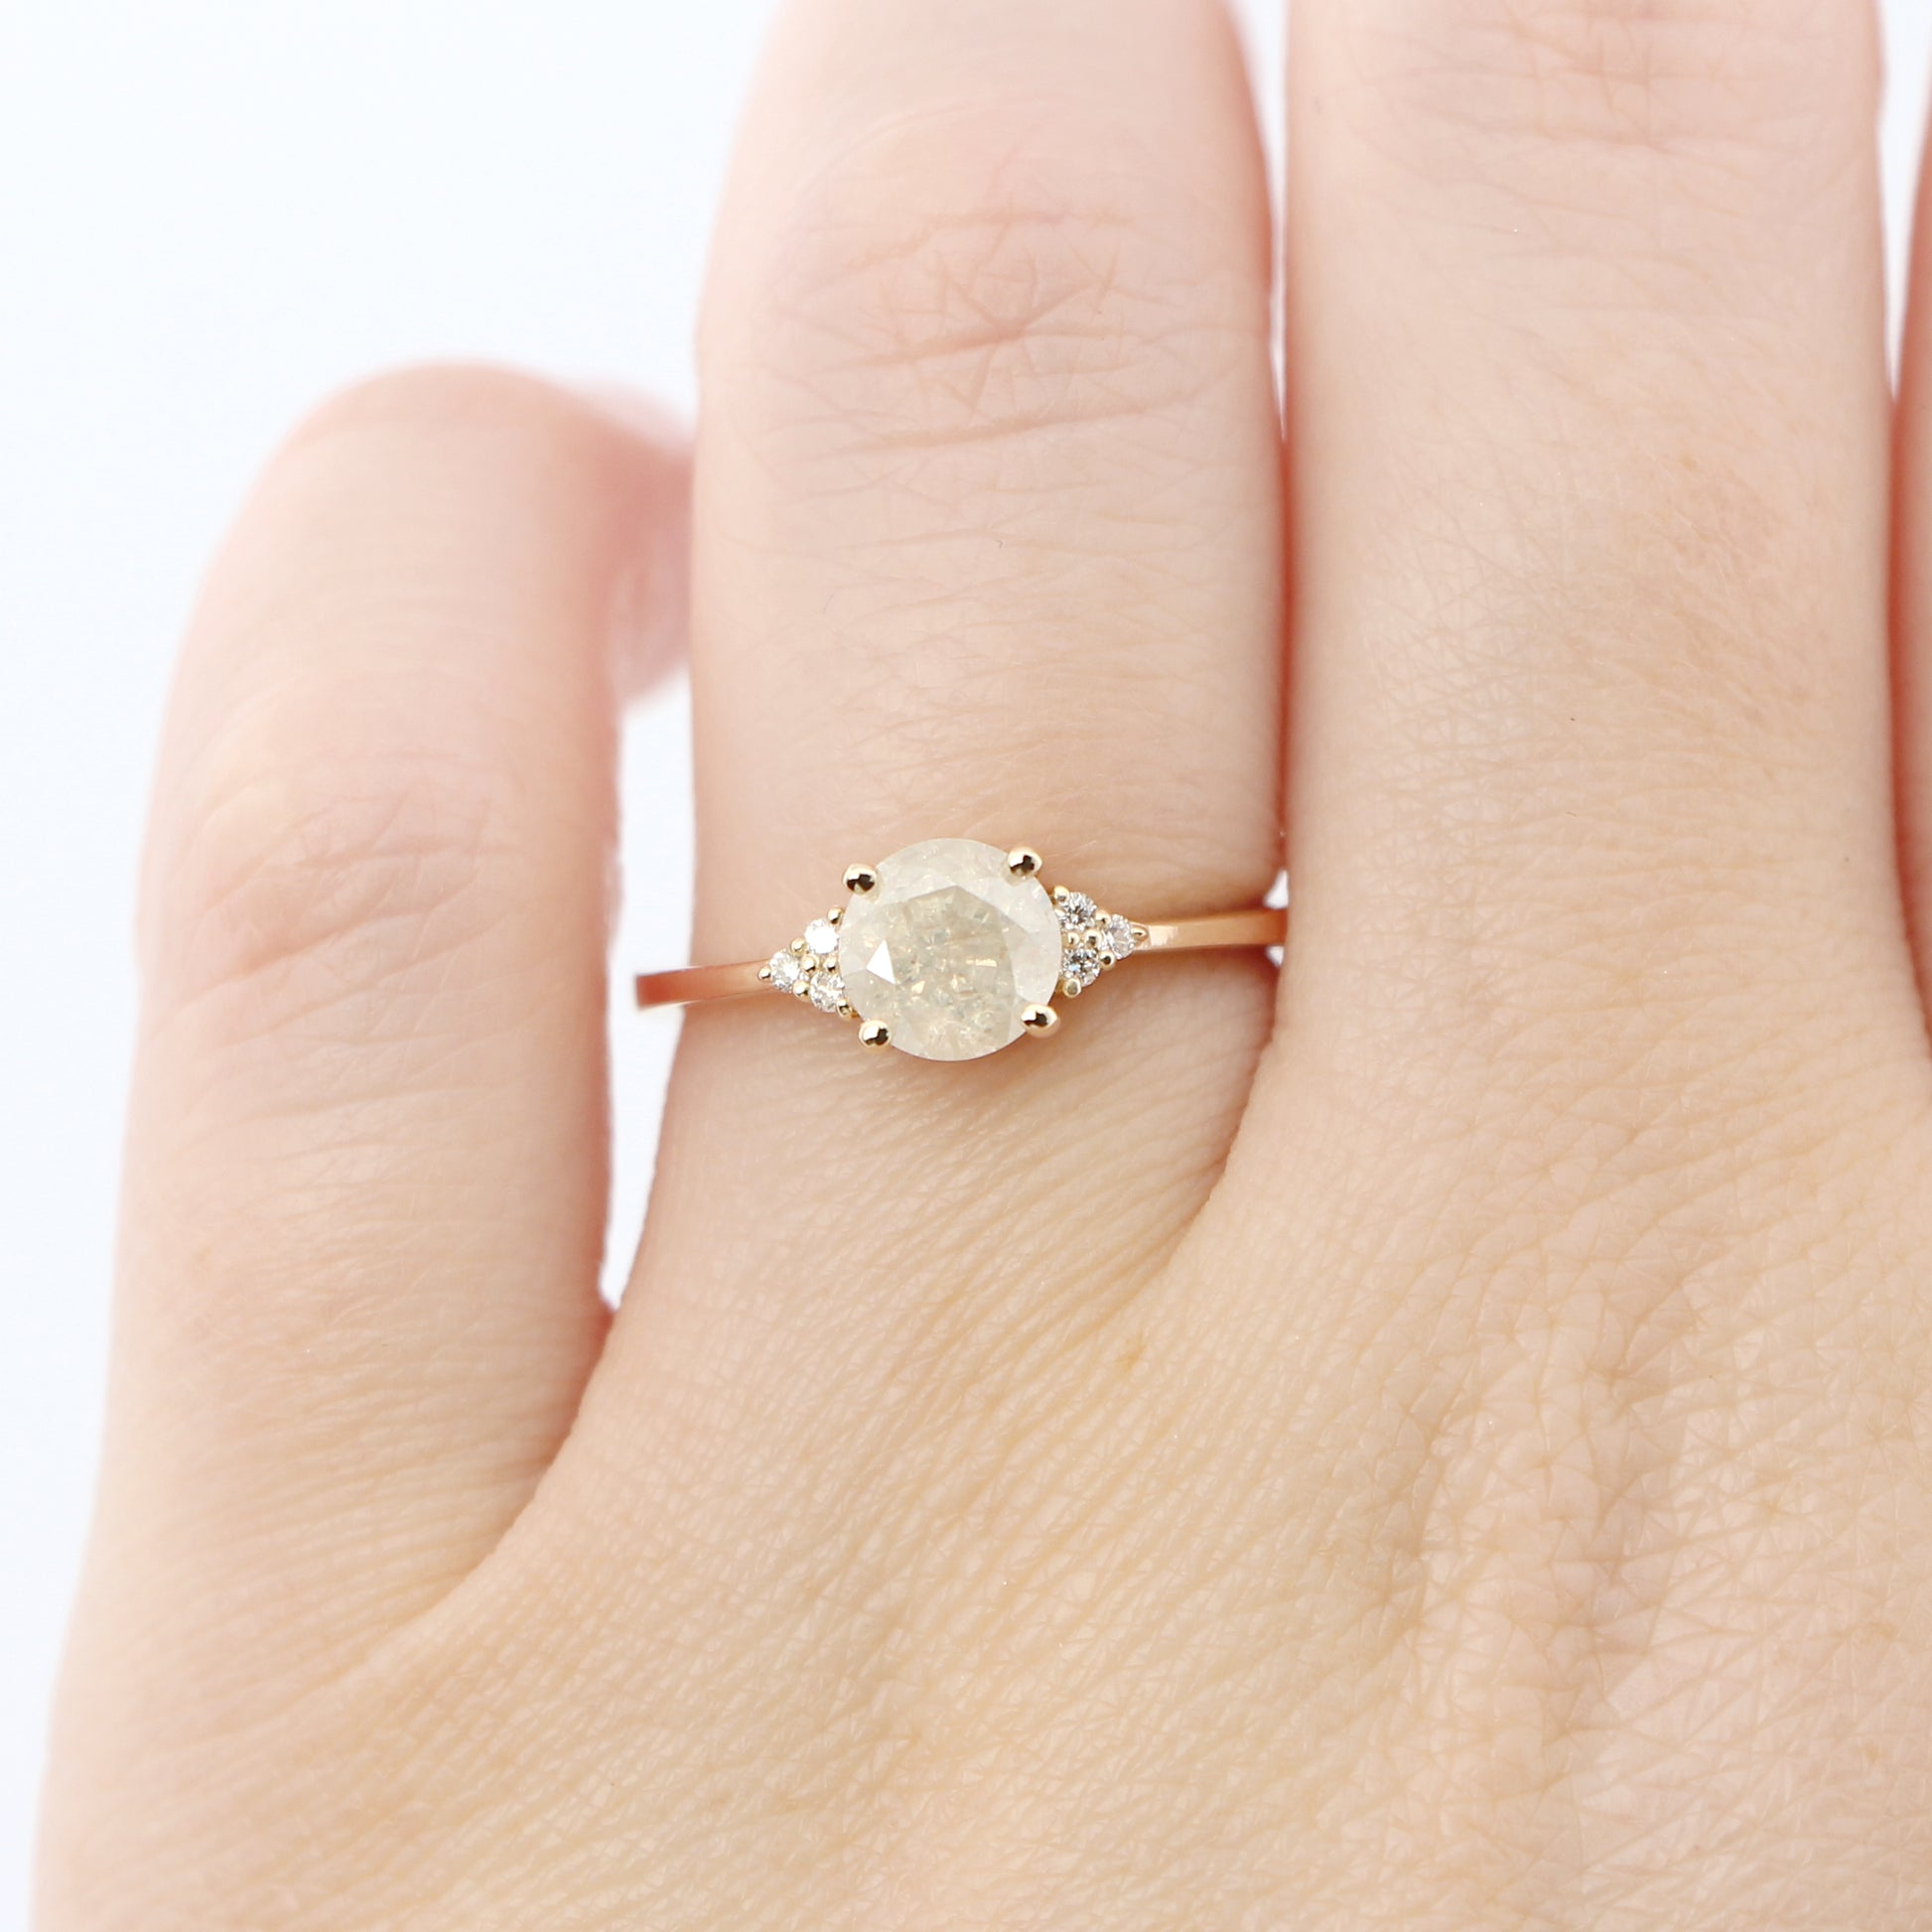 Imogene Ring with a 1.14 Carat Round Misty White Celestial Diamond and White Accent Diamonds in 14k Yellow Gold - Ready to Size and Ship - Midwinter Co. Alternative Bridal Rings and Modern Fine Jewelry